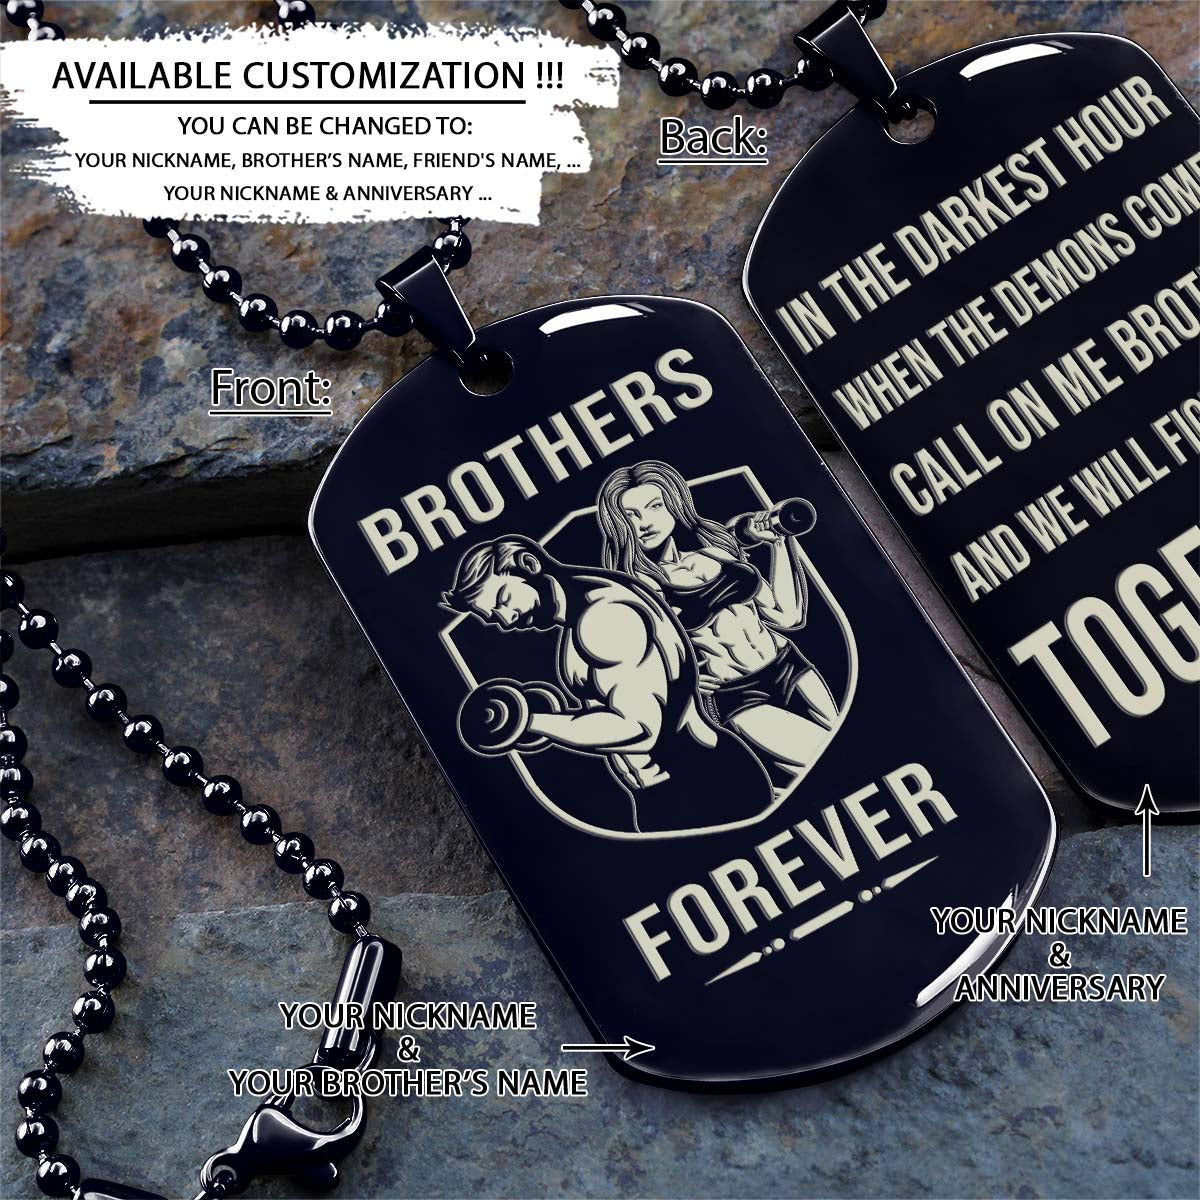 GYMD012 - Brothers Forever - Call On Me Brother - Gym - Fitness Center - Workout - Gym Dog Tag - Gym Necklace - Black Engrave Dog Tag